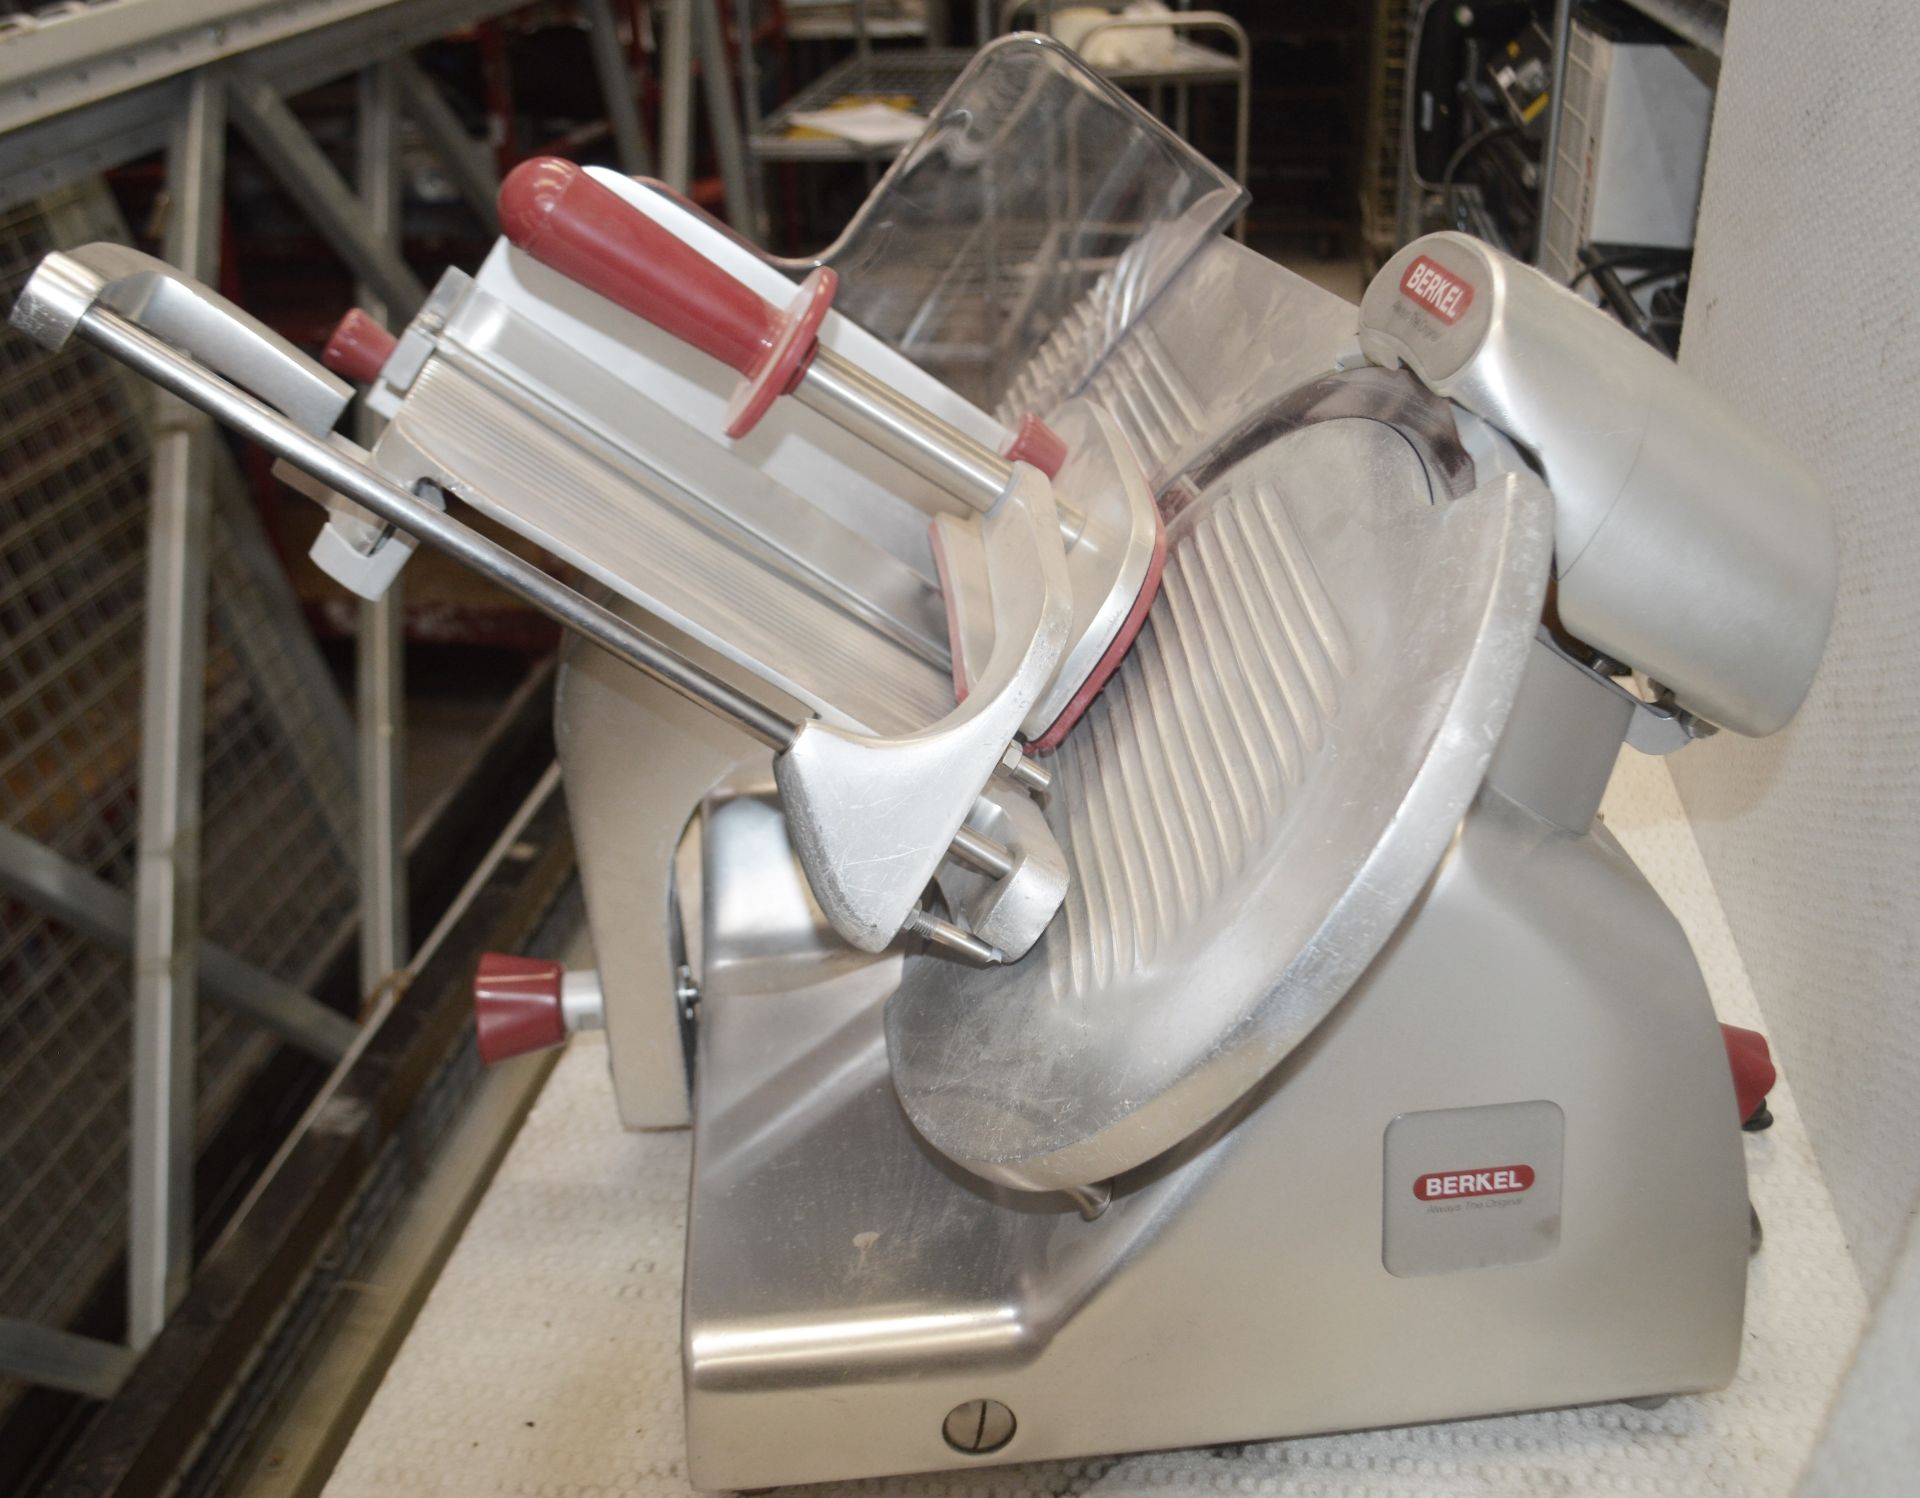 1 x Berkel 12" Commercial Cooked Meat / Bacon Slicer - 220-240v - Model BSPGL04011A0F - Image 3 of 4